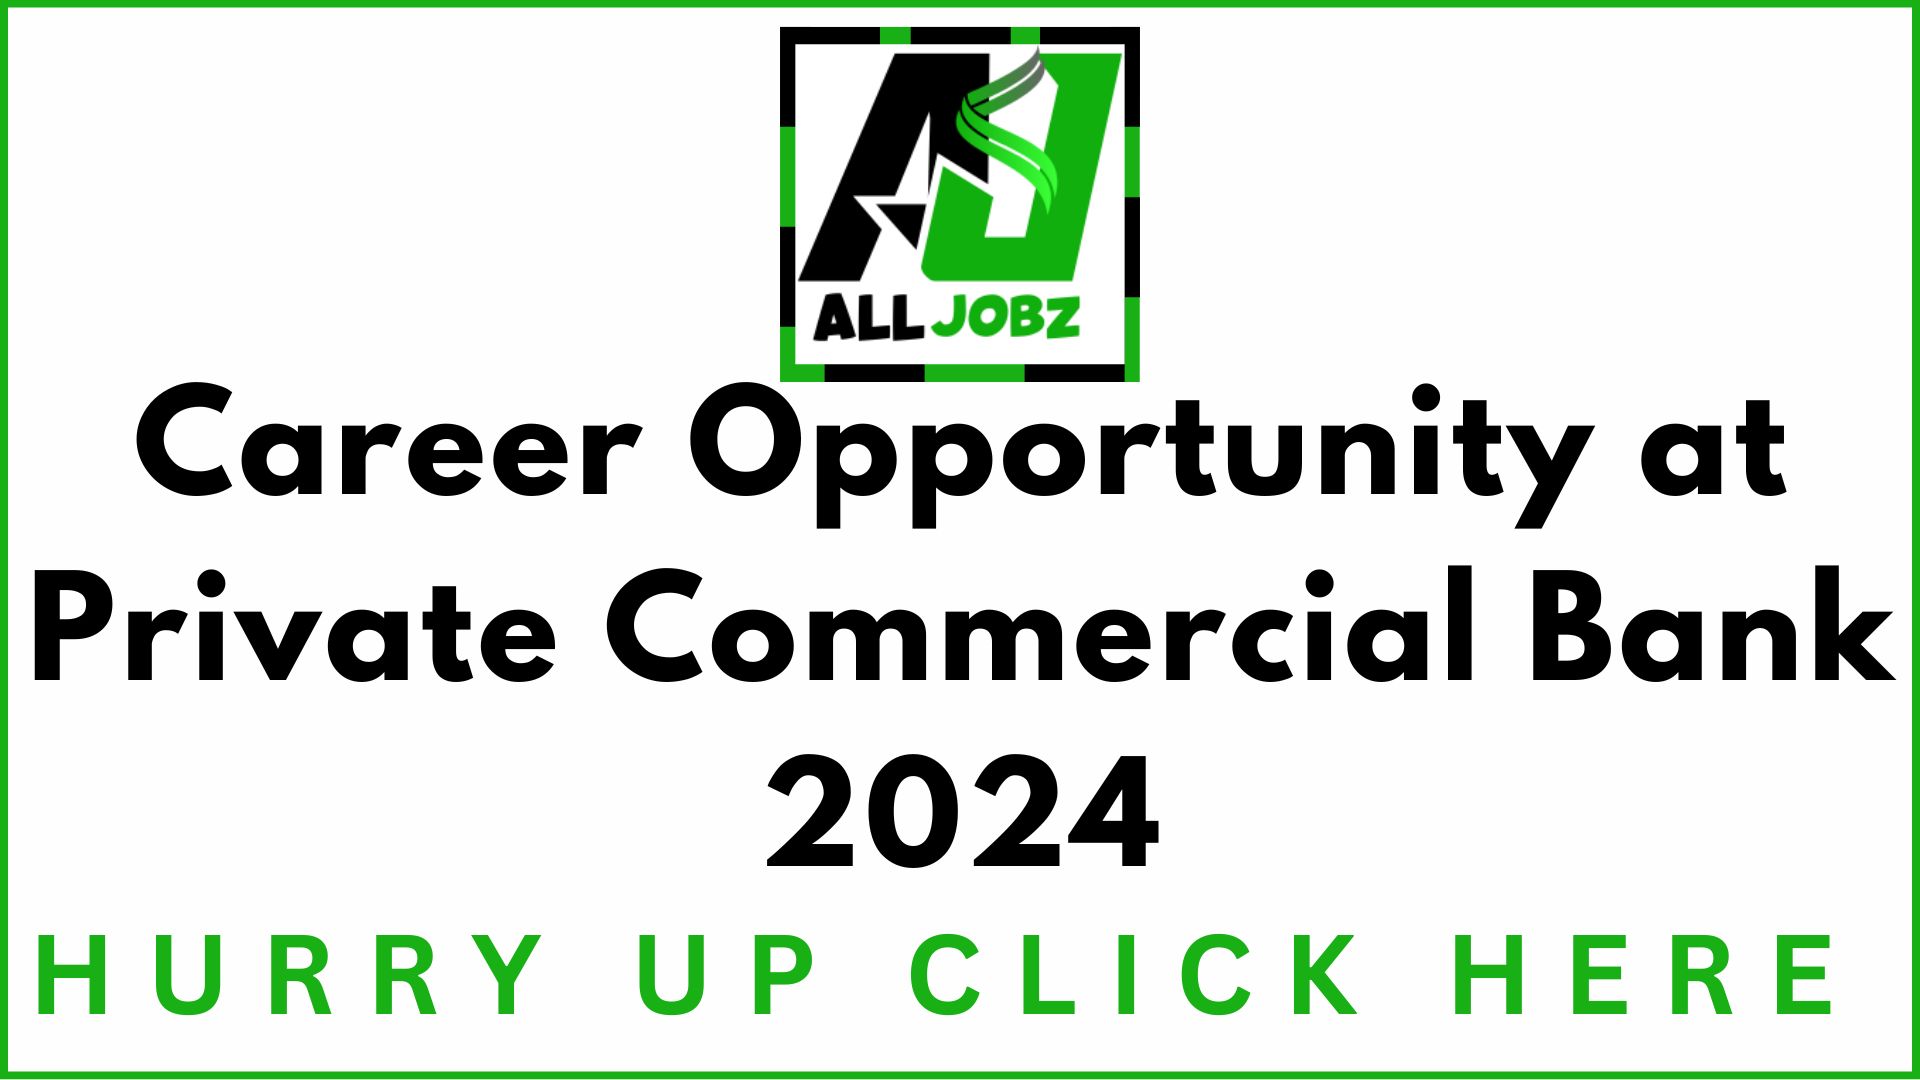 Private Commercial Bank Job Opportunities, Career Opportunity At Private Commercial Bank 2024 Karachi, Private Commercial Bank Job In Pakistan, Private Commercial Bank Jobs 2024 Sindh, Private Commercial Bank Jobs 2024 In Pakistan, Private Commercial Bank Jobs 2024 Online Apply, Private Commercial Bank Jobs 2024 Karachi, Bank Jobs May 2024, Cso Jobs In Bank'S, Job In Banks,